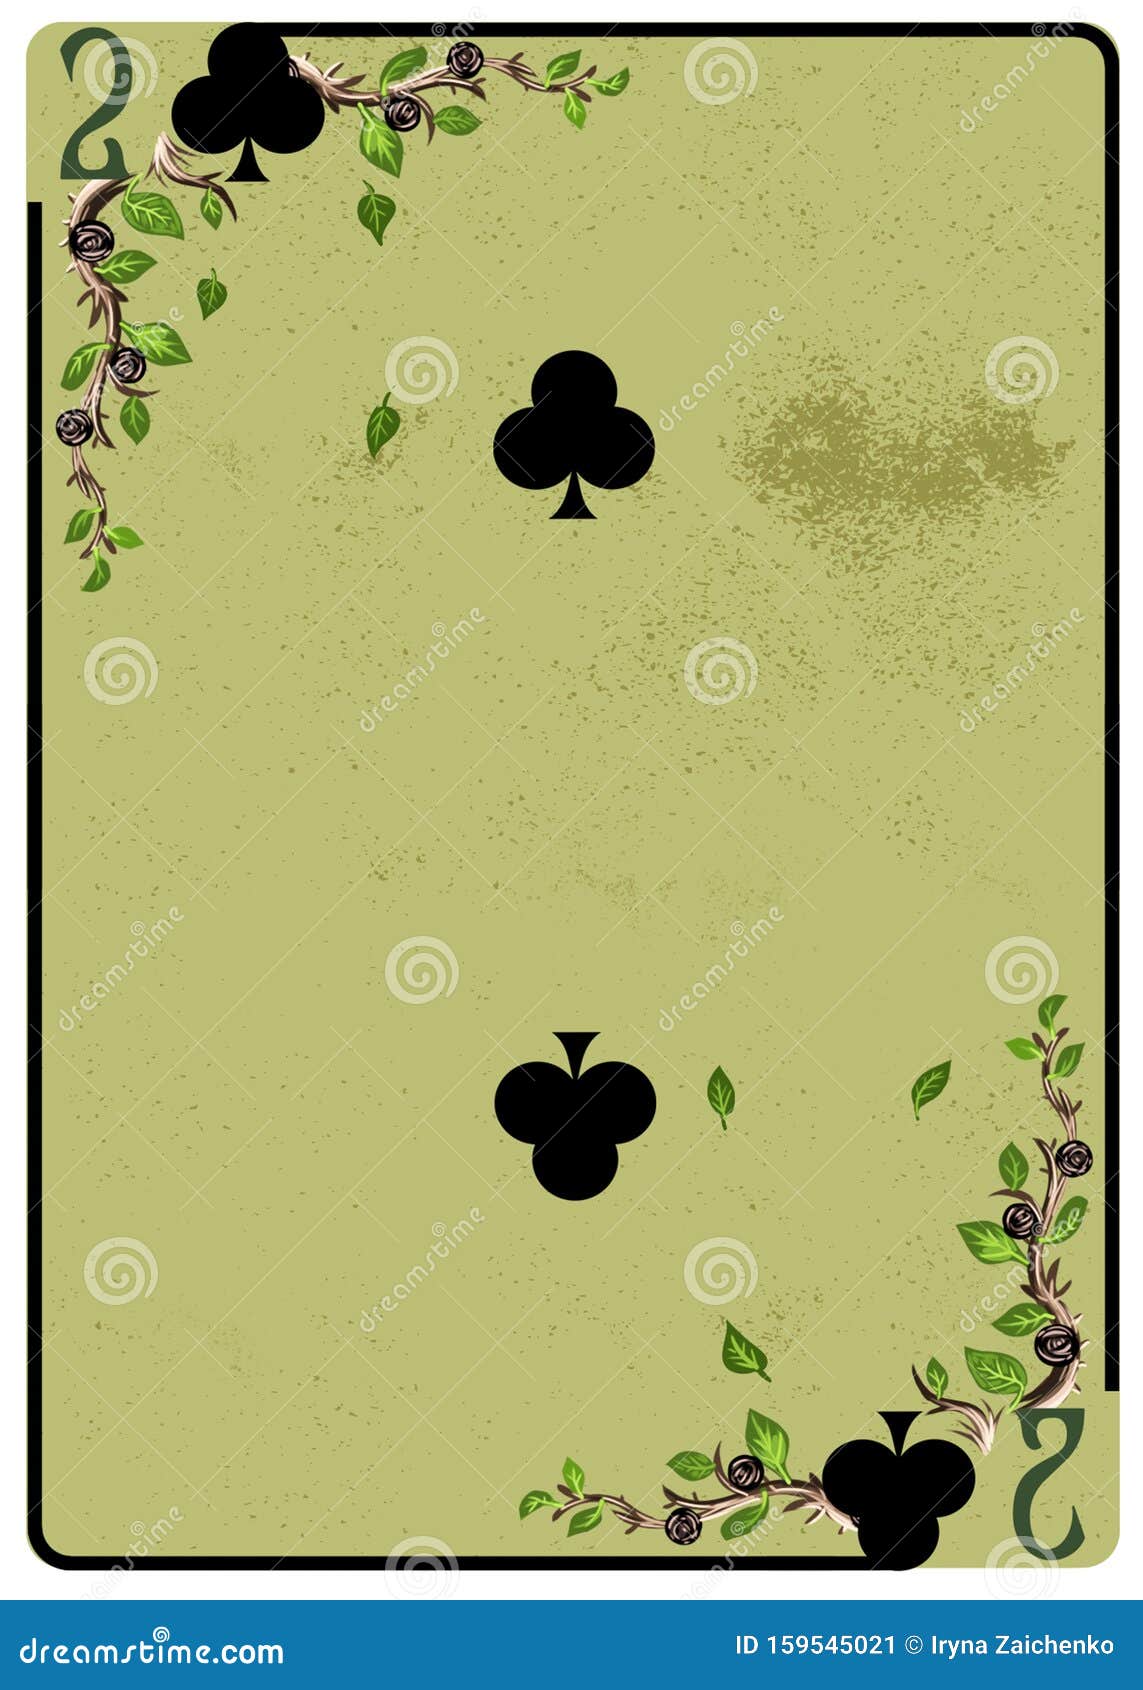 two of clubs playing card. unique hand drawn pocker card. one of 52 cards in french card deck, english or anglo-american pattern.